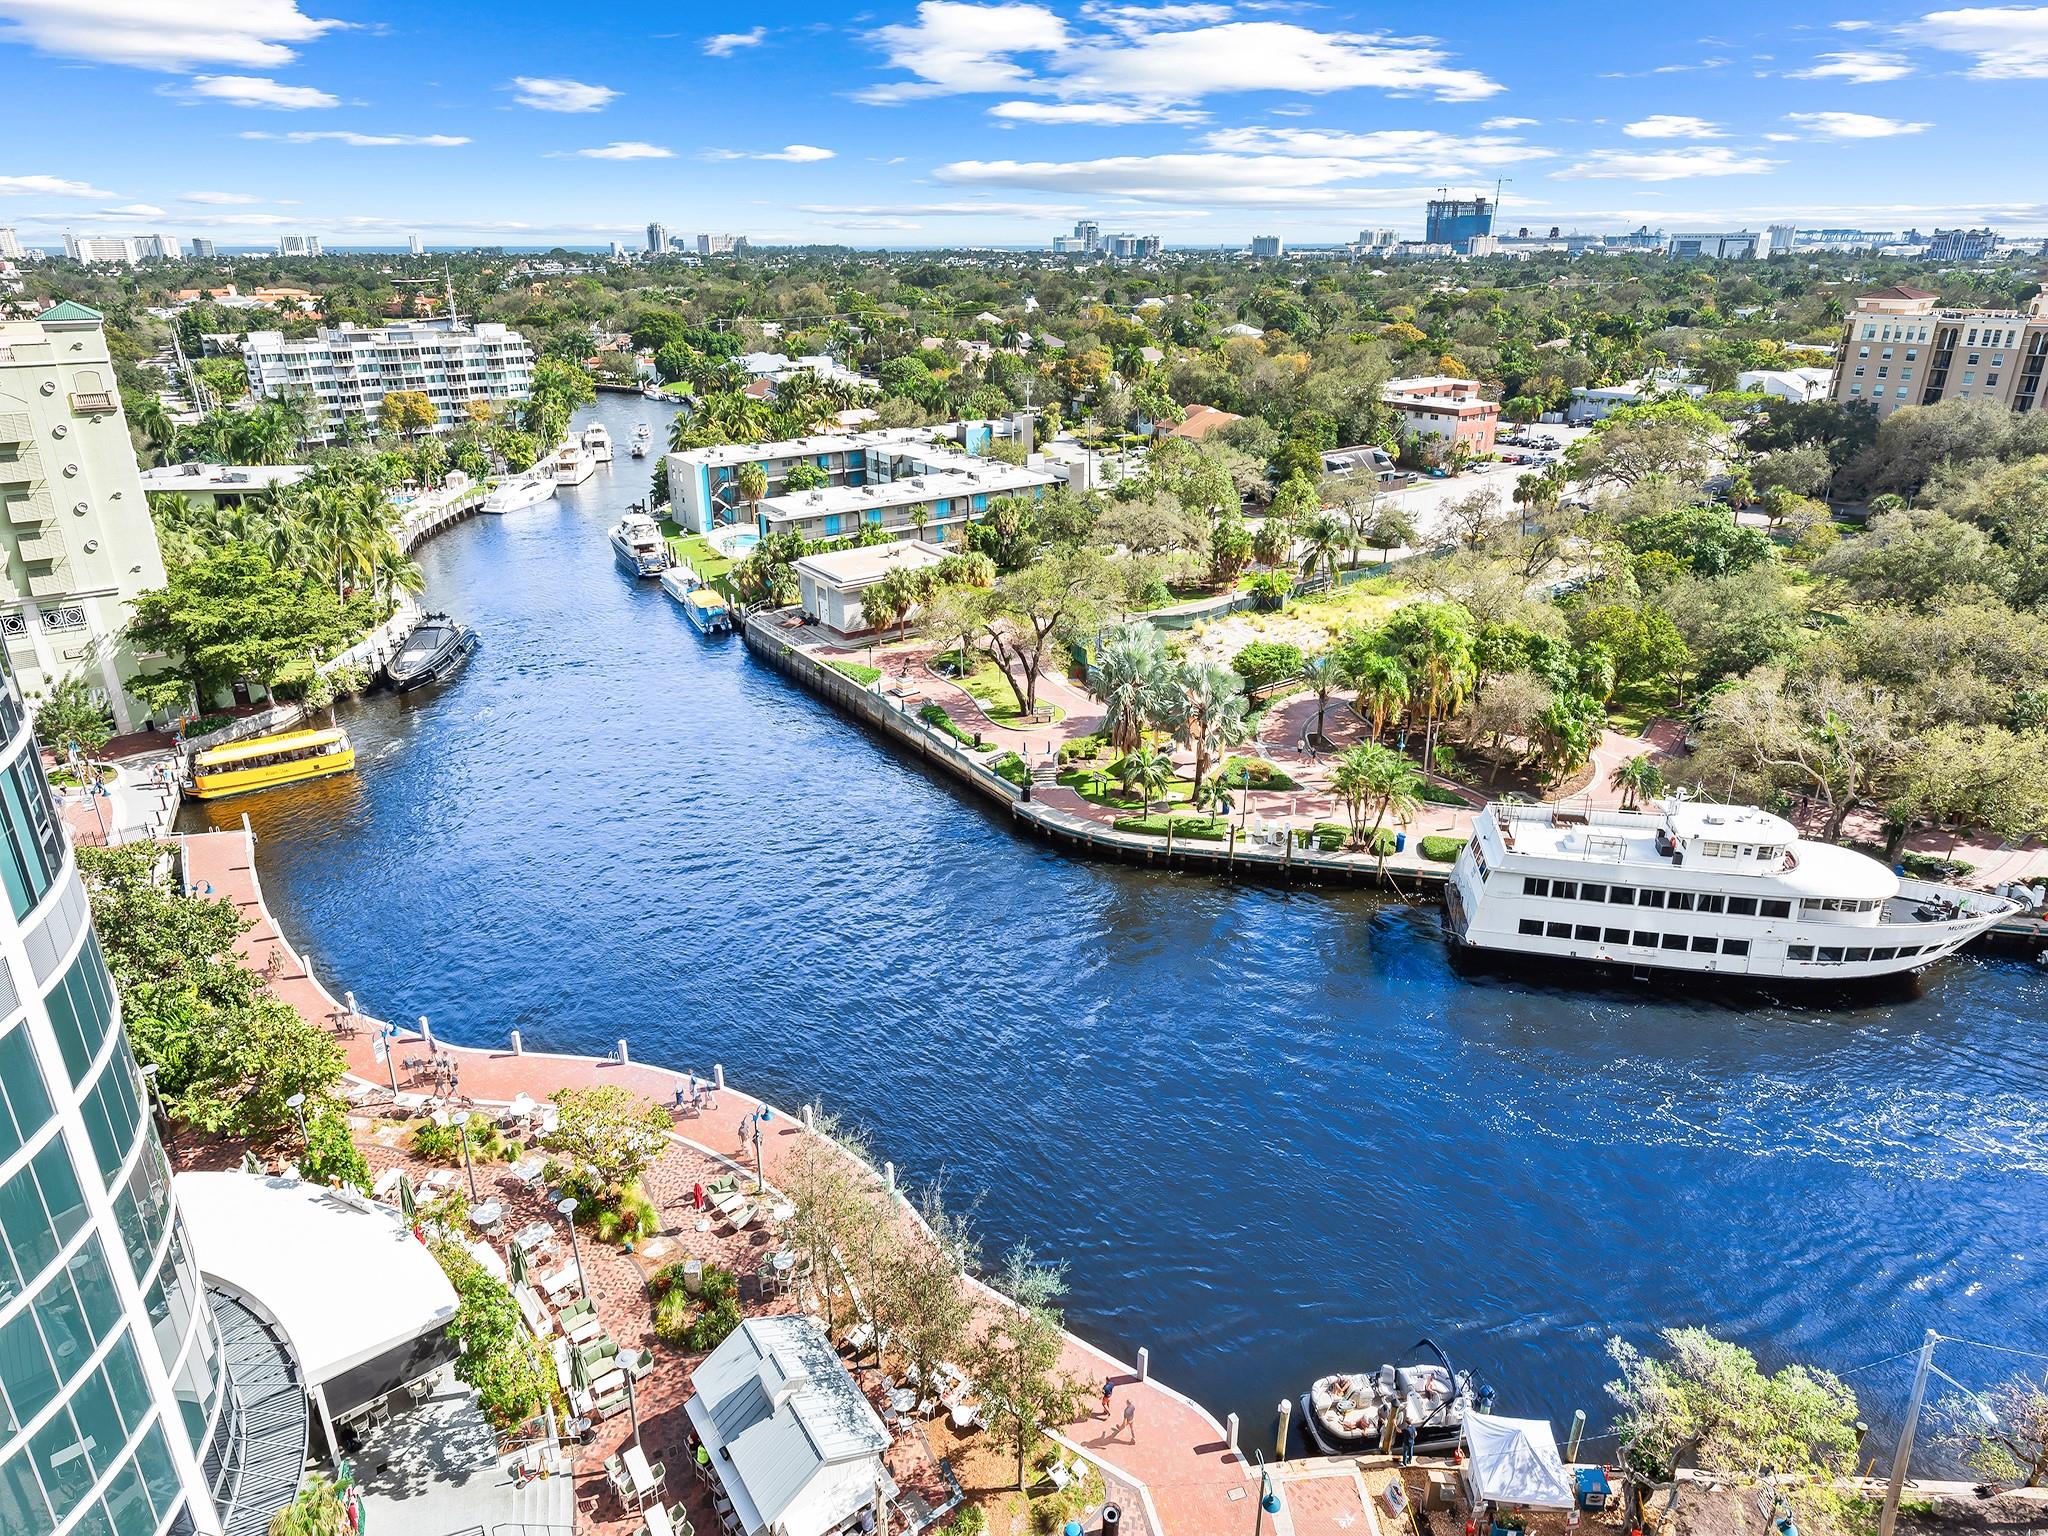 DIRECT RIVER VIEWS IN THE HEART OF LAS OLAS! THREE BEDROOMS, 3.5 BATHS & TWO TERRACES SPREAD OVER 3100 SQFT OF THIS SPACIOUS FLOOR PLAN W/ EAST & WEST EXPOSURES. THIS UNIT FEATURES MARBLE FLOORS THROUGHOUT, GERMAN ENGINEERED POGGENPOHL CABINETRY, GRANITE COUNTERTOPS & BACKSPLASH, SUBZERO, THERMADORE COOKTOP, DOUBLE OVENS, MICROWAVE, WINE COOLER, DISHWASHER, SINK/DISPOSAL. THE PRIMARY SUITE ADJOINS TO THE RIVER FACING TERRACE & FEATURES LARGE CUSTOM WALK IN CLOSET, MARBLE BATH W/ DUAL SINKS SHOWER PRIVATE WATER CLOSET AREA. SECOND & THIRD BEDROOMS HAVE ENSUITE BATHS, GARDEN VIEW TERRACES W/ FLOOR TO CEILING GLASS SLIDERS. LARGE LAUNDRY WITH SIDE-BY-SIDE WASHER AND DRYER AND LAUNDRY SINK 2 ZONE HVAC UNITS.